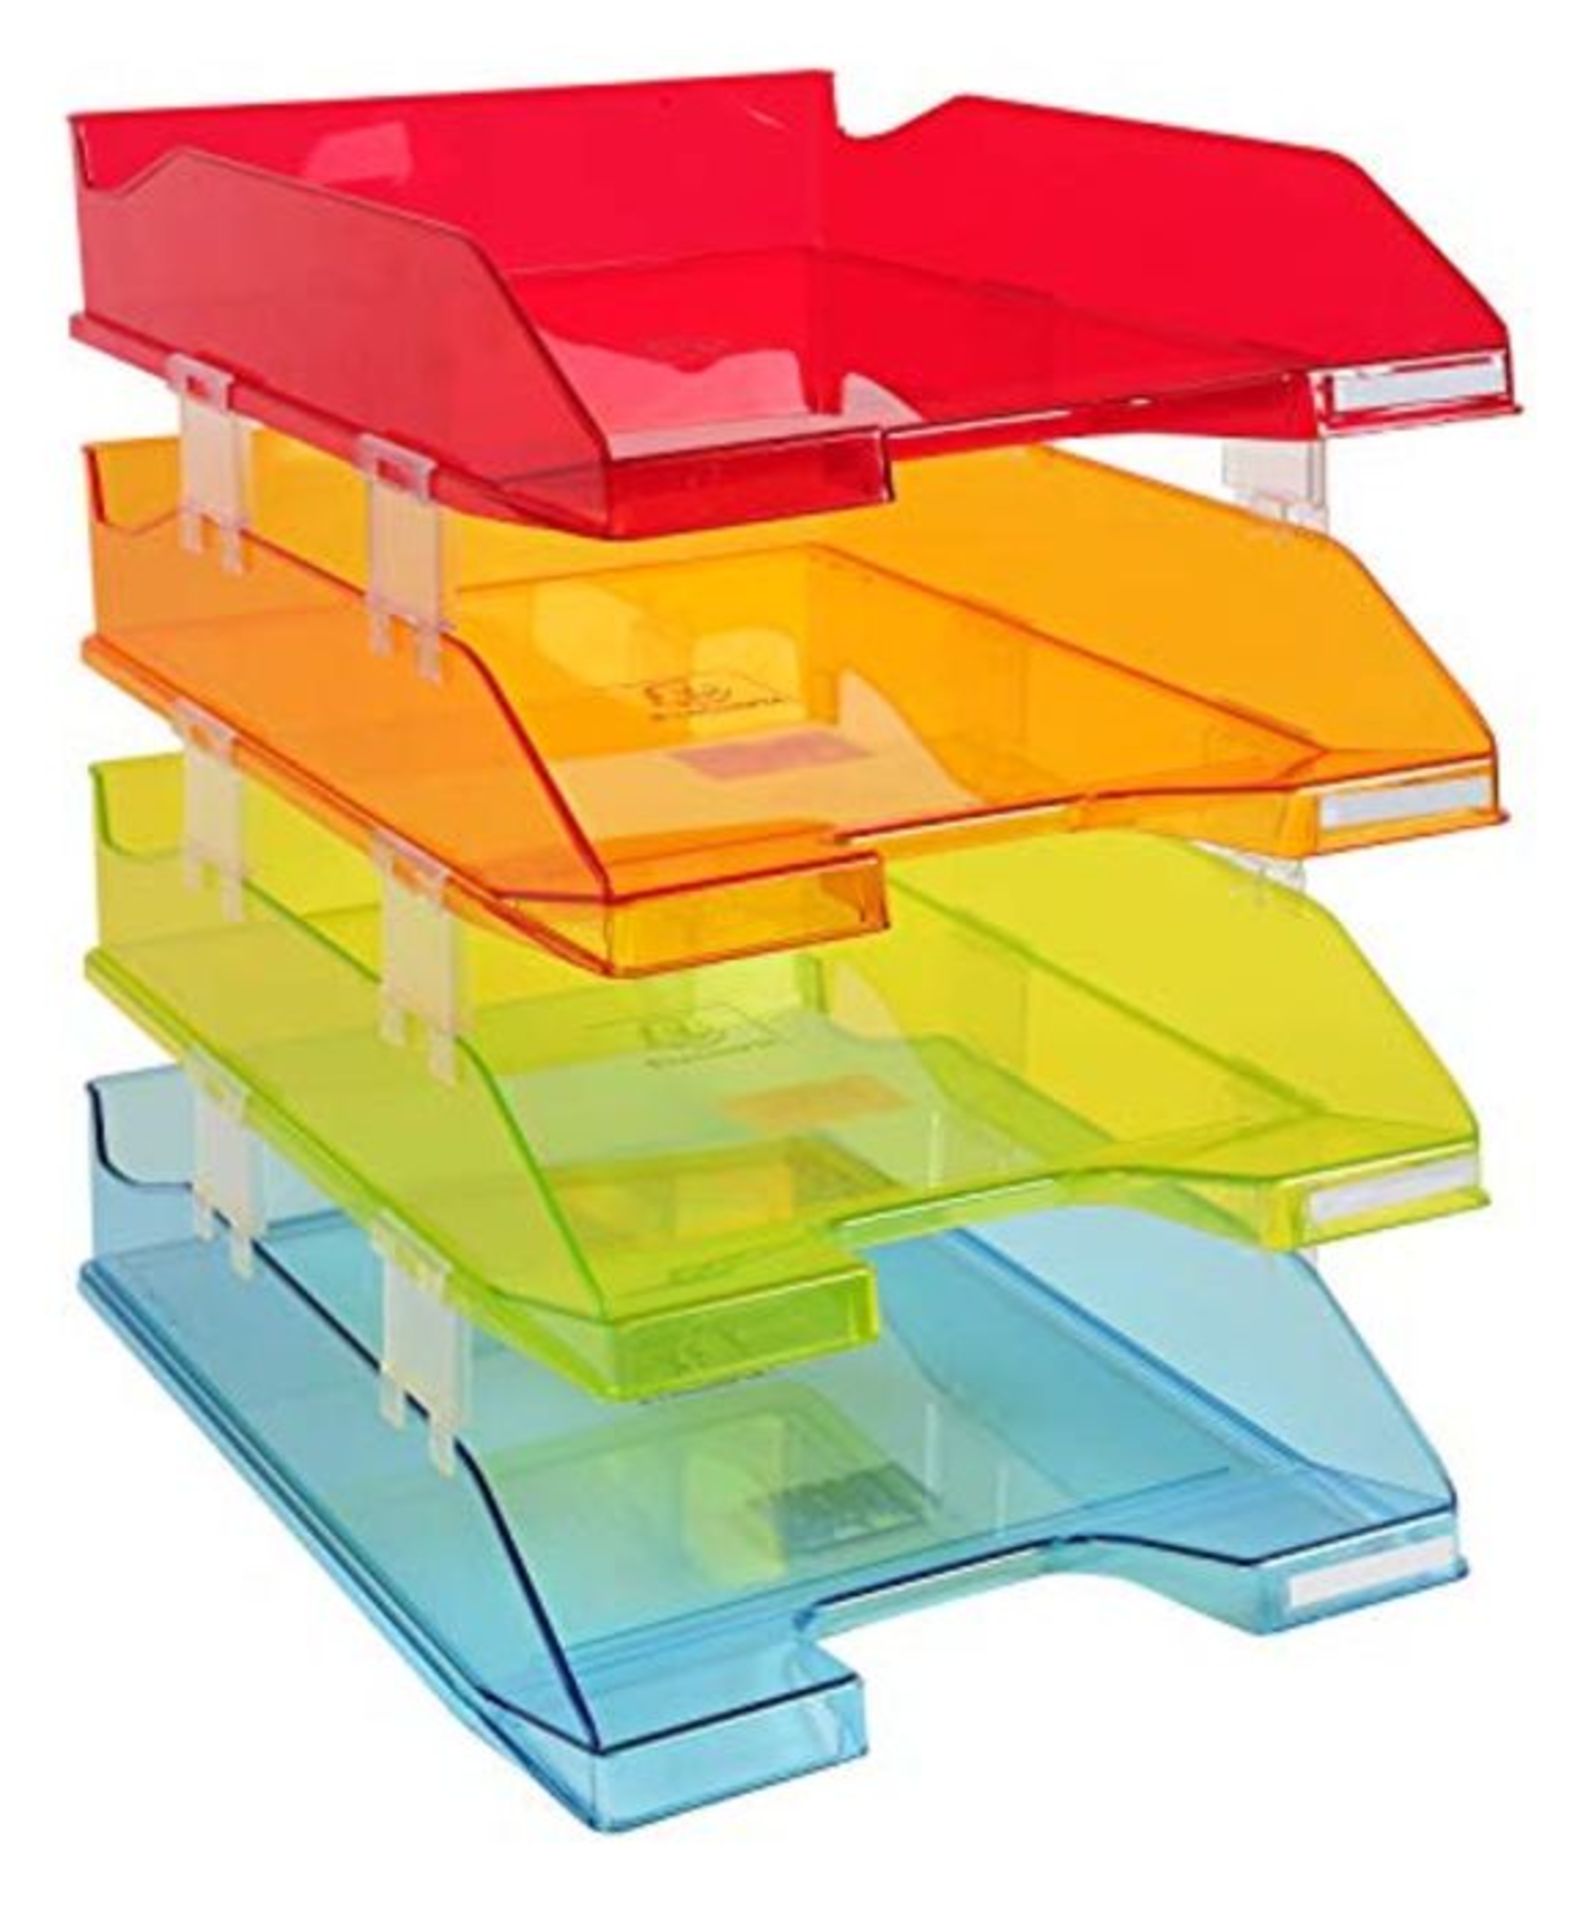 [CRACKED] Exacompta Linicolor Letter Tray Combo Midi, A4+ - Assorted Colours, Set of 4